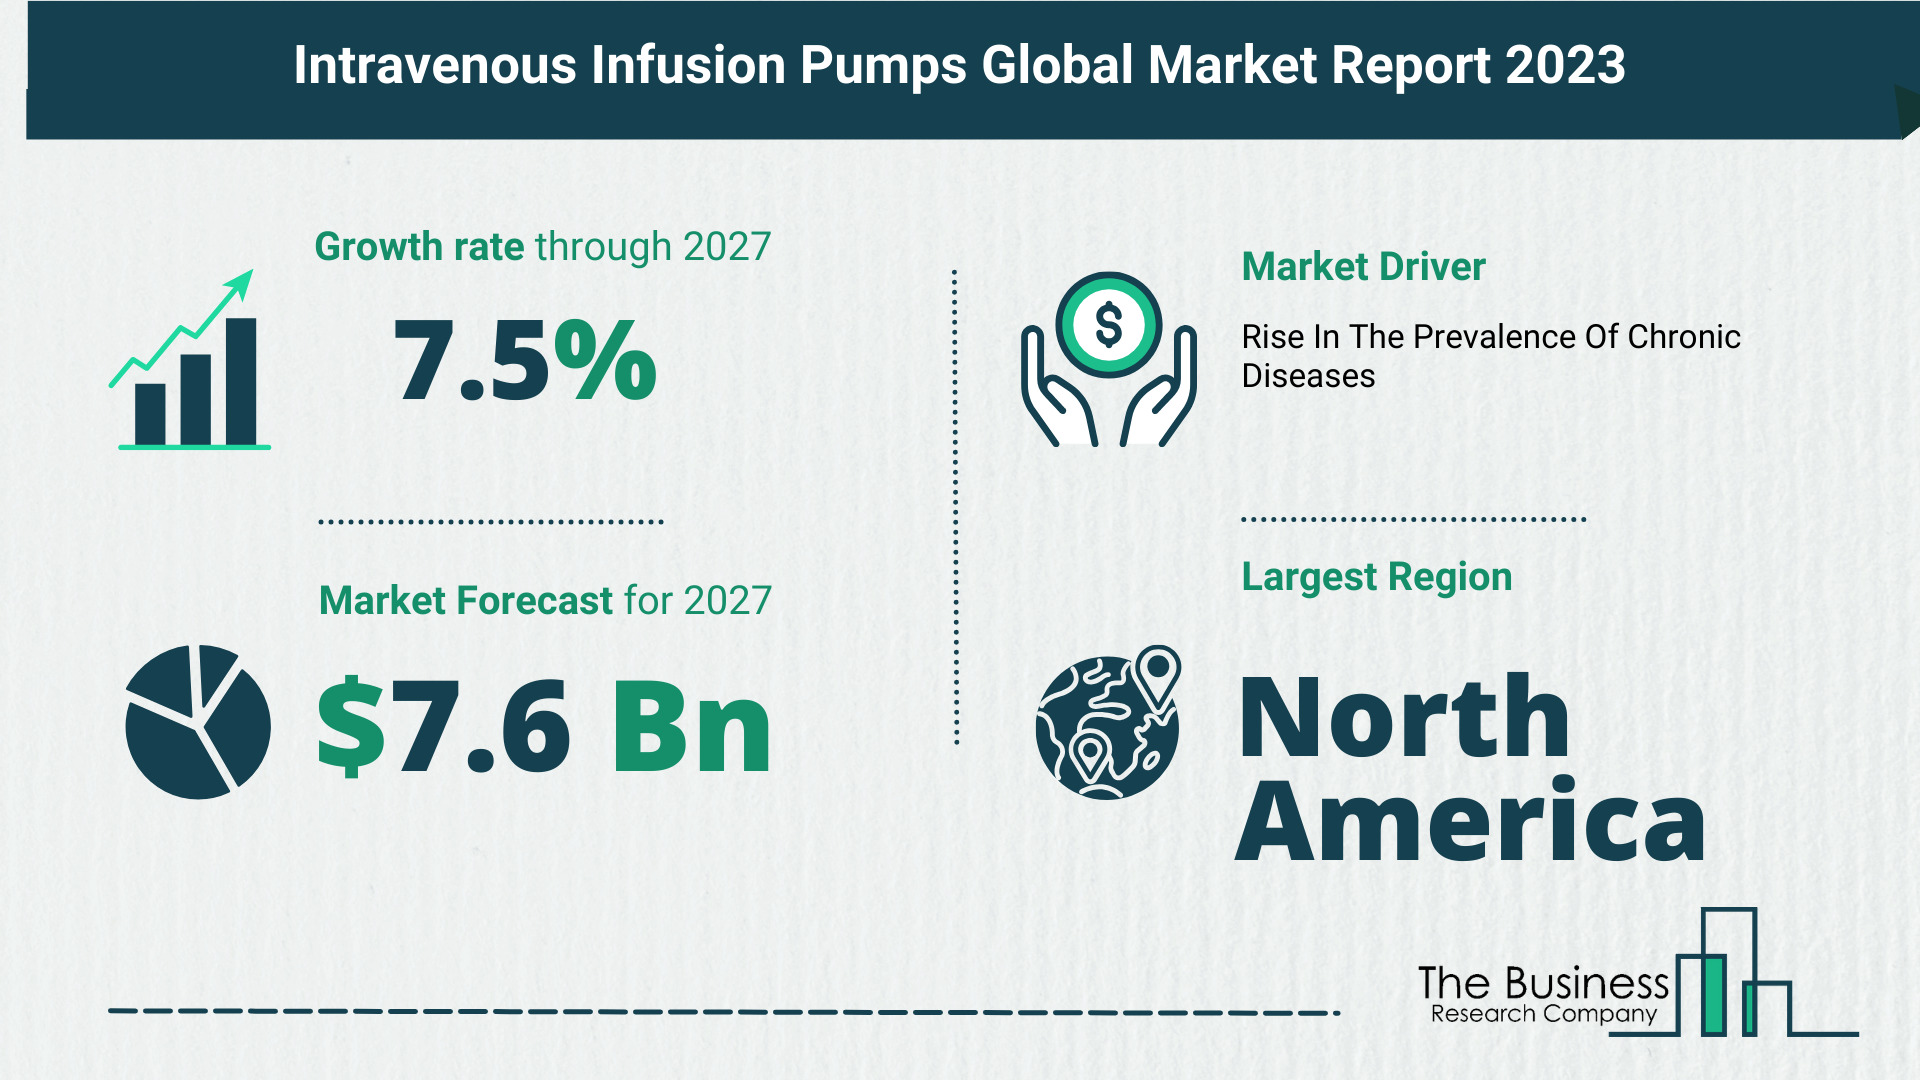 Understand How The Intravenous Infusion Pumps Market Is Poised To Grow Through 2023-2032